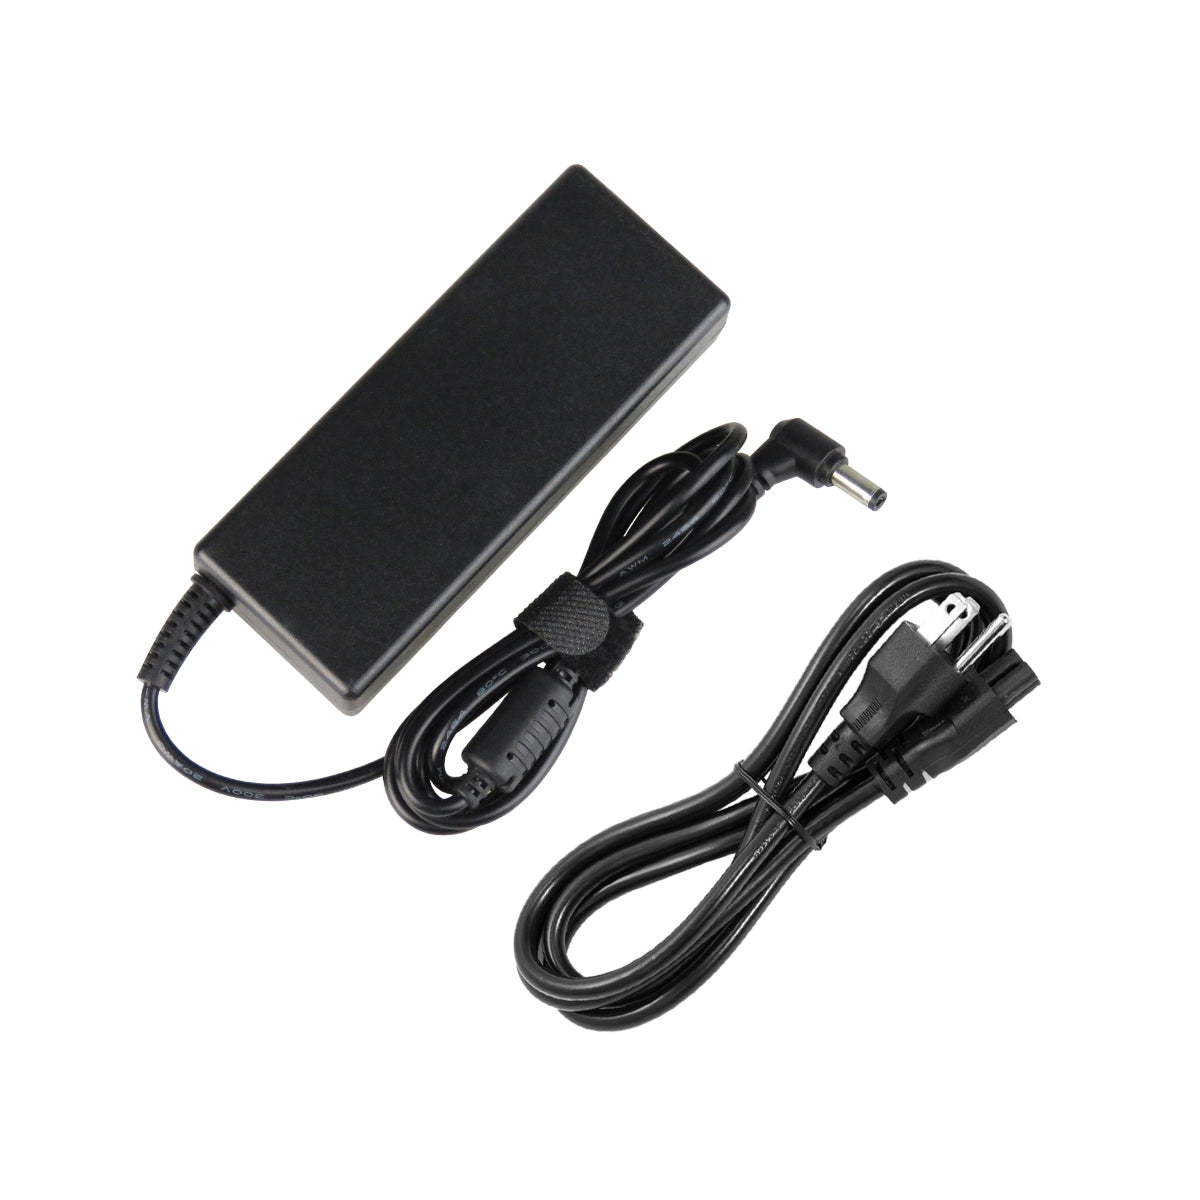 AC Adapter Charger for ASUS X551M Series Notebook.